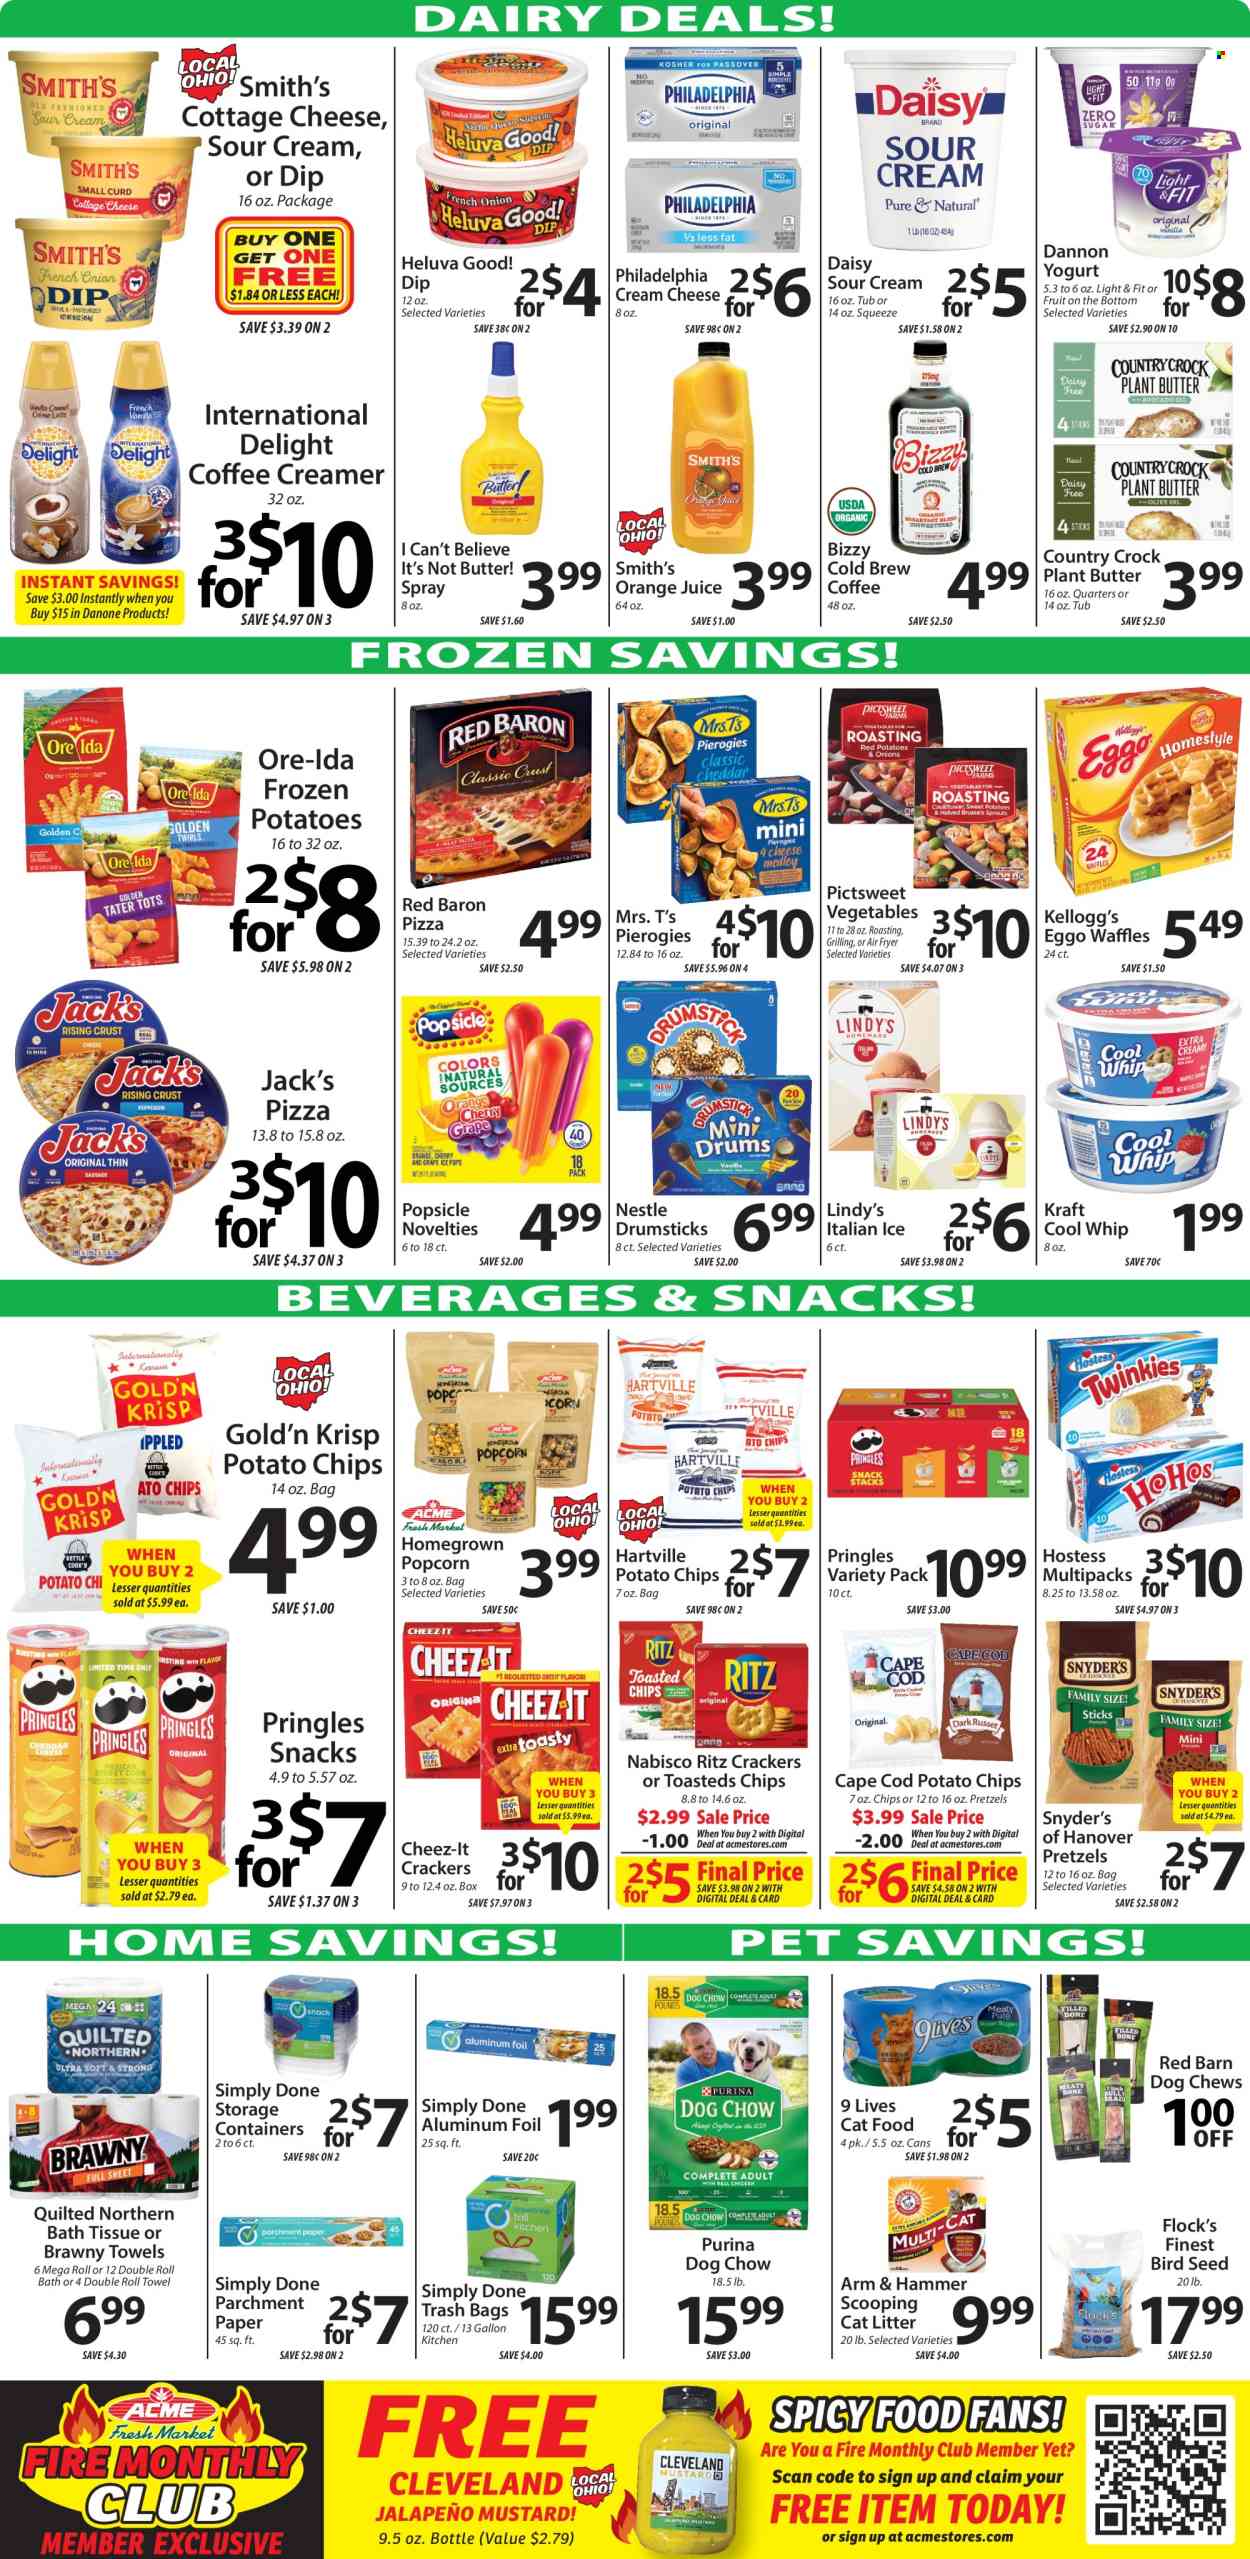 thumbnail - ACME Fresh Market Flyer - 06/27/2024 - 07/03/2024 - Sales products - pretzels, waffles, pizza, Kraft®, ready meal, cottage cheese, Philadelphia, yoghurt, Danone, Dannon, margarine, I Can't Believe It's Not Butter, Cool Whip, creamer, coffee and tea creamer, dip, ice cream, ice cream bars, ice cones, popsicle, Ore-Ida, Red Baron, Nestlé, crackers, Kellogg's, snack cake, RITZ, Nabisco, potato chips, Pringles, Smith's, popcorn, Cheez-It, salty snack, ARM & HAMMER, mustard, orange juice, juice, iced coffee, coffee drink, bath tissue, Quilted Northern, trash bags, cat litter. Page 3.